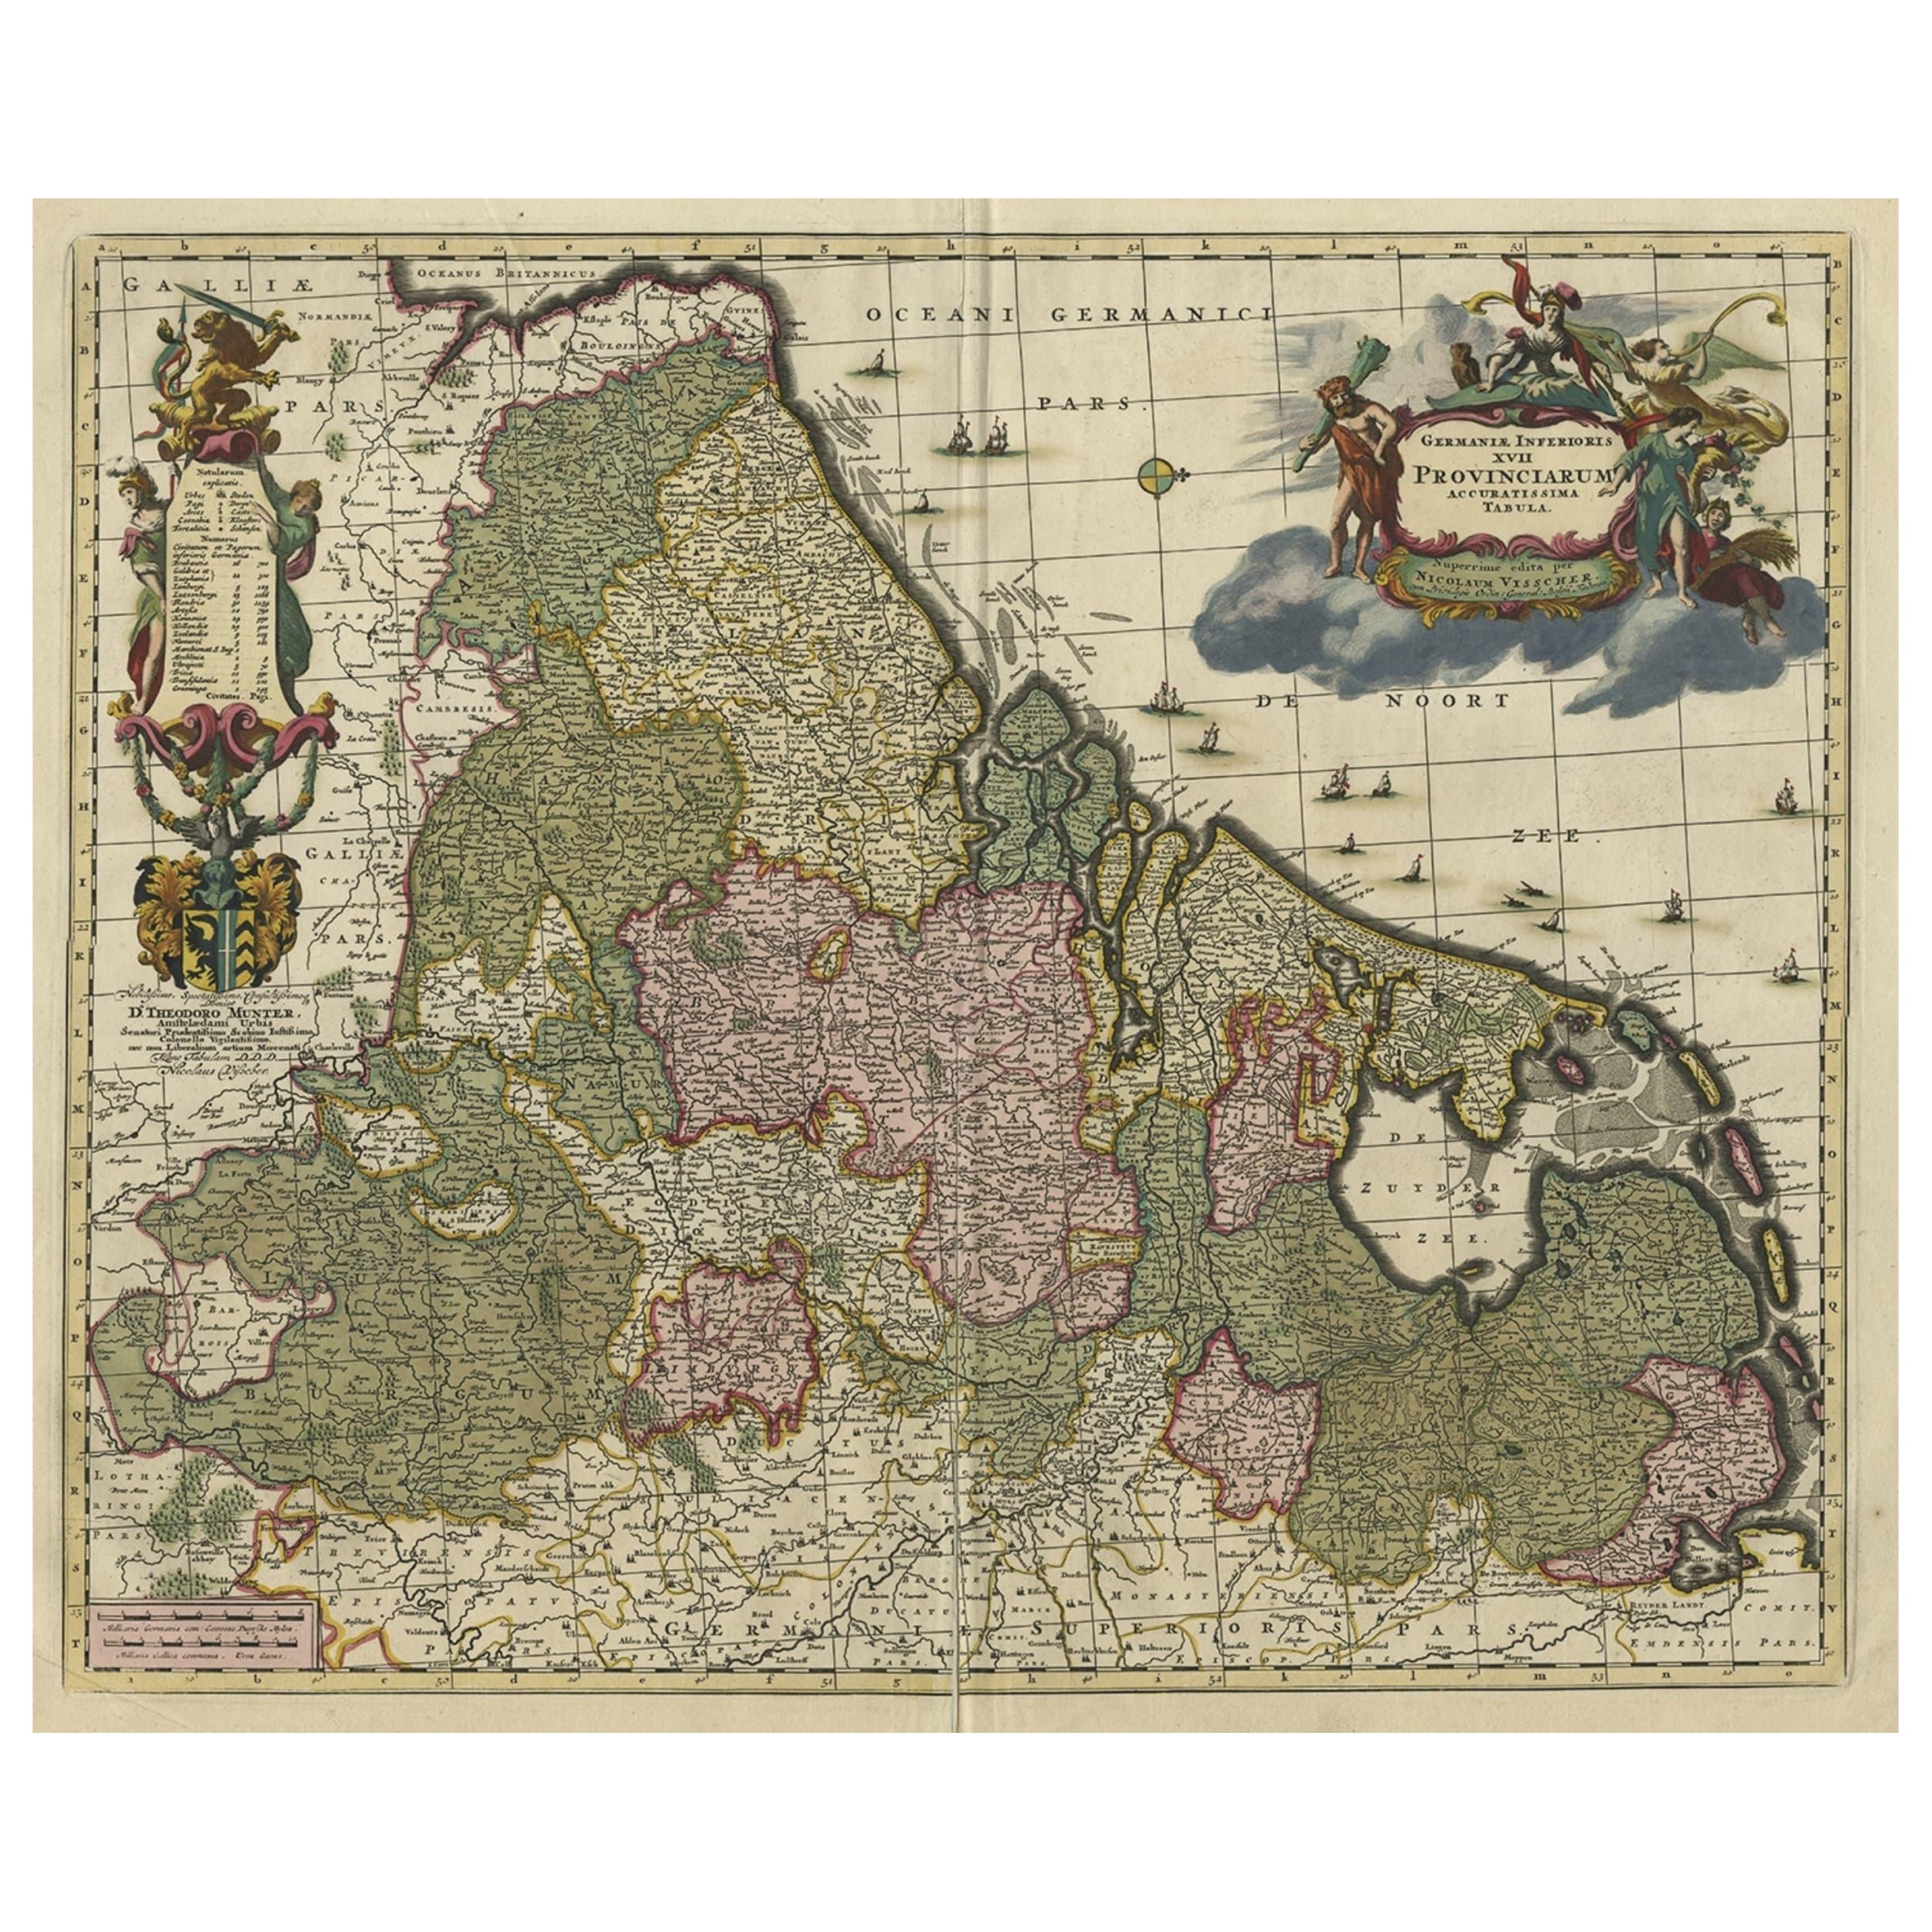 Antique Decorative Map of the Low Countries, '17 Provinces, Netherlands', c.1680